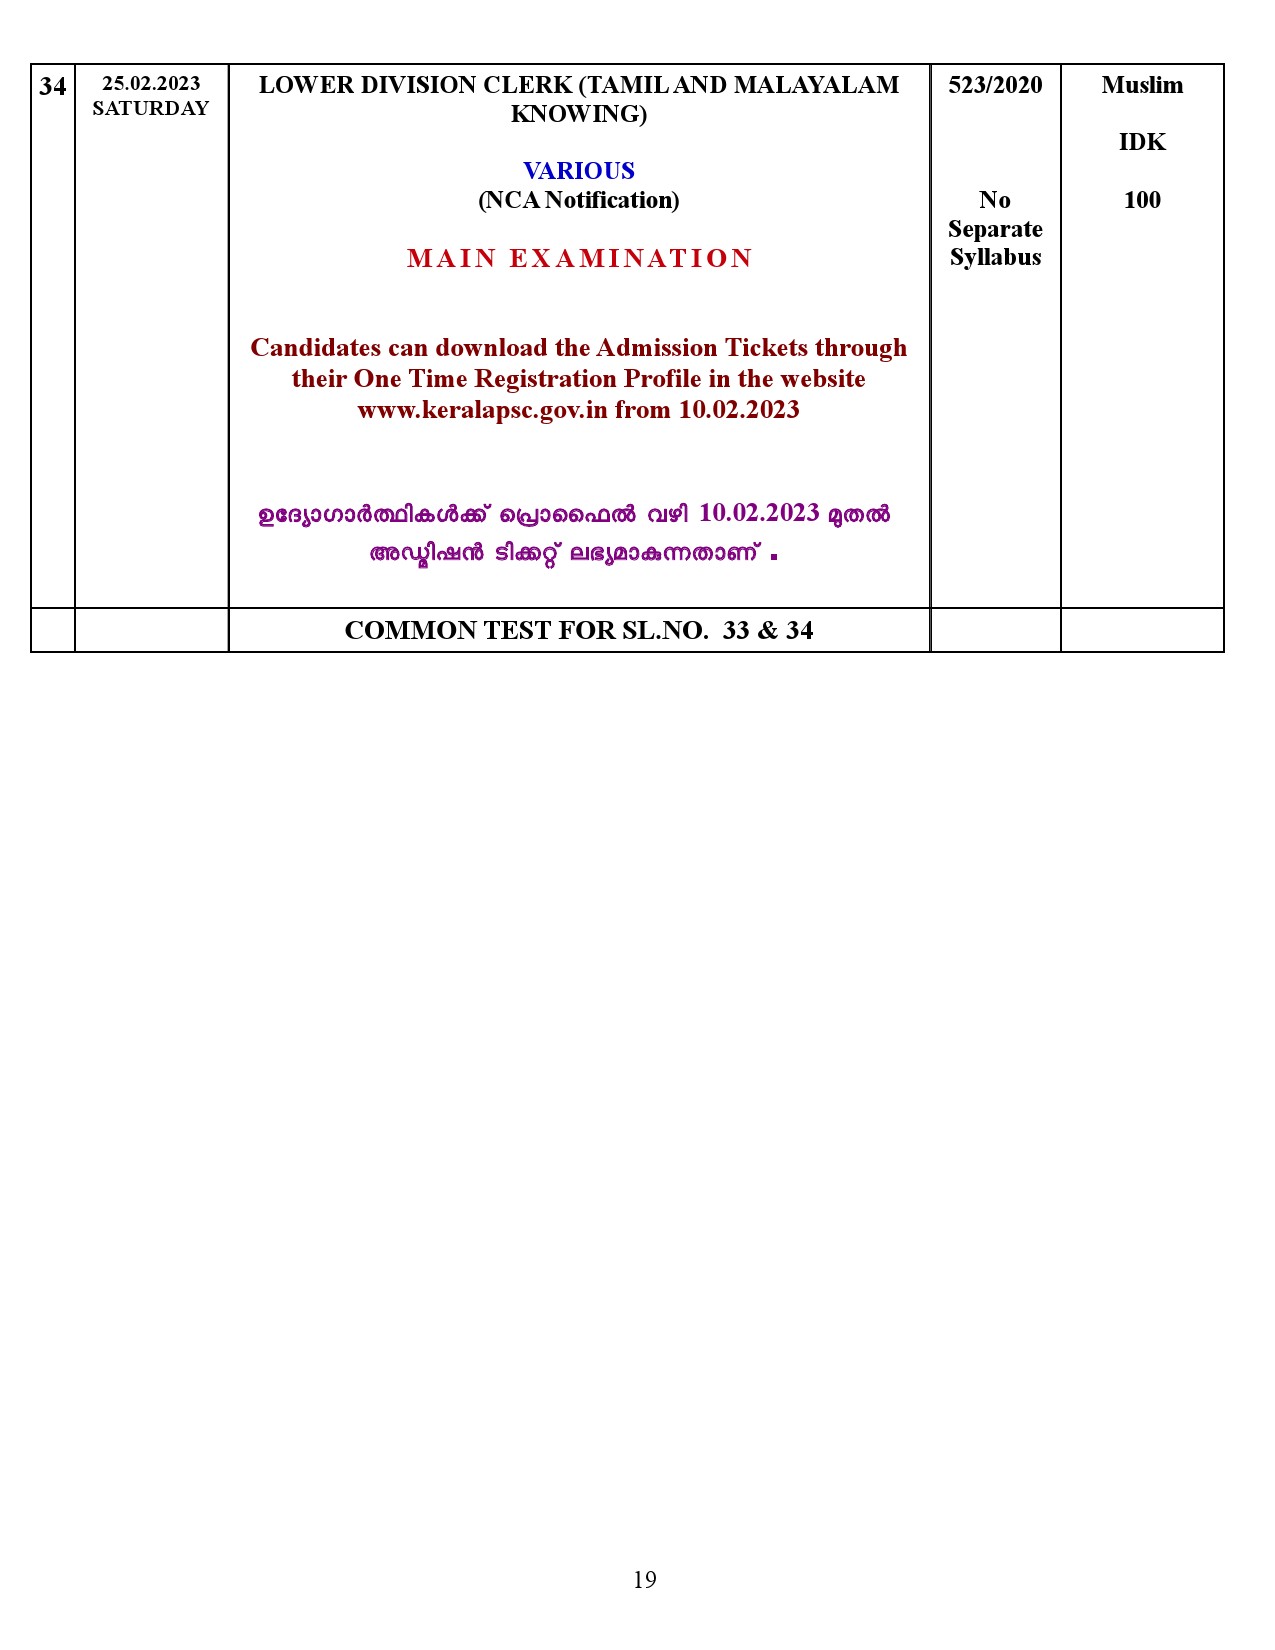 KPSC Examination Programme For The Month Of February 2023 - Notification Image 19